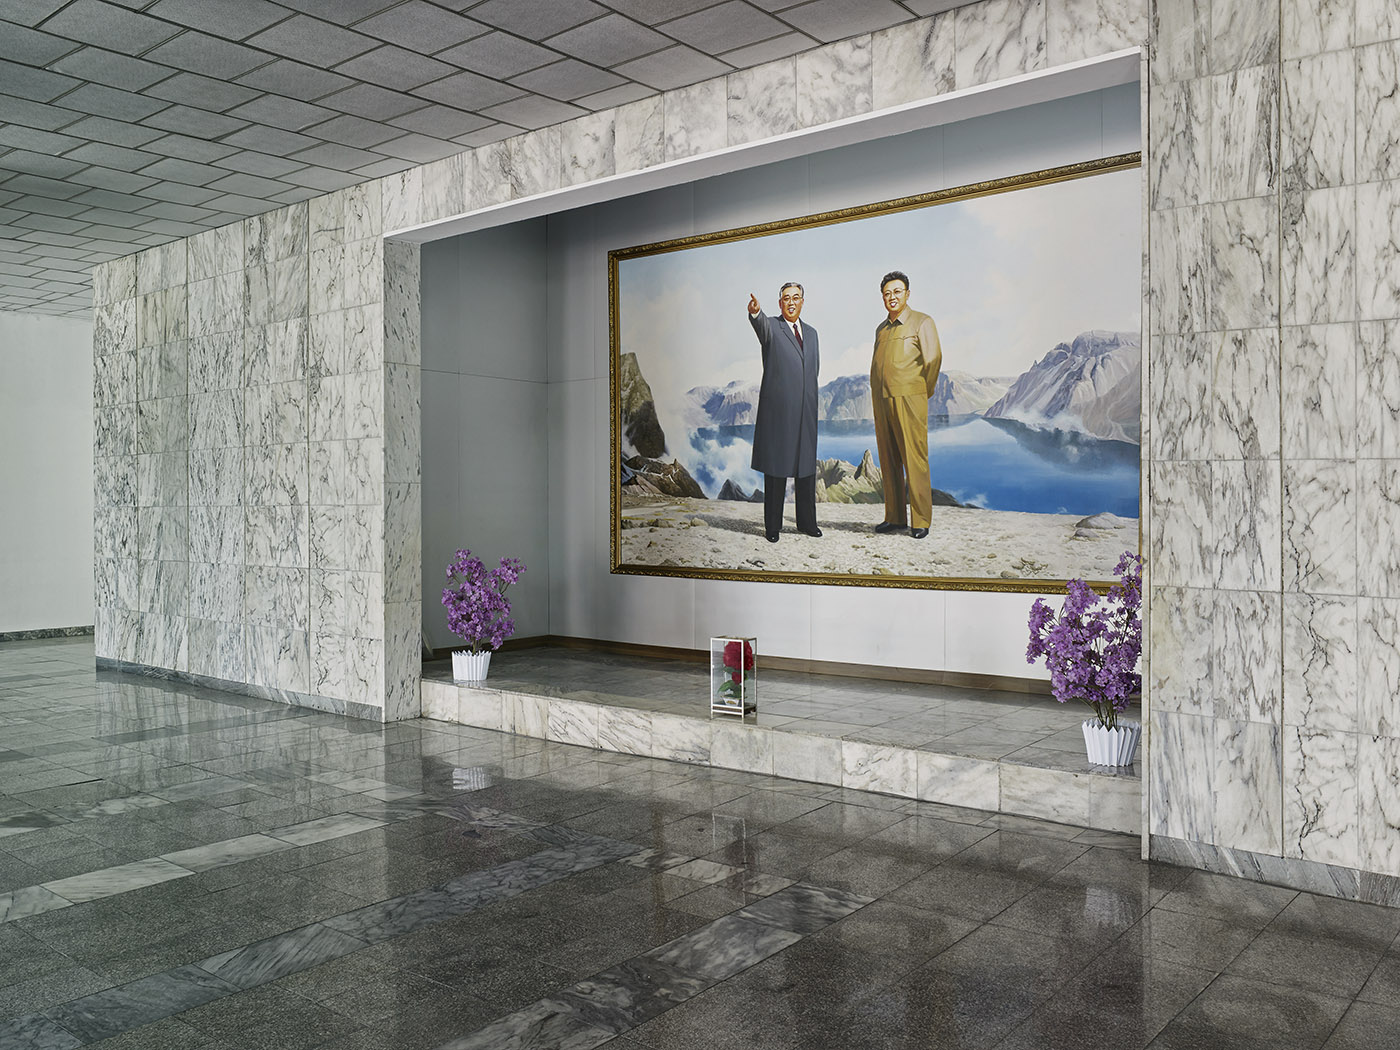 Portrait of the Leaders, Jannamsan Hotel, Kaesong, Pyongyang.
                              There are a number of portraits of the North Korean leaders, featuring specific backdrops or content that have been officially approved and are displayed throughout the country. Artists who have been specially trained in reproducing the image of the leaders create all these portraits at Mansudae Art Studio in Pyongyang